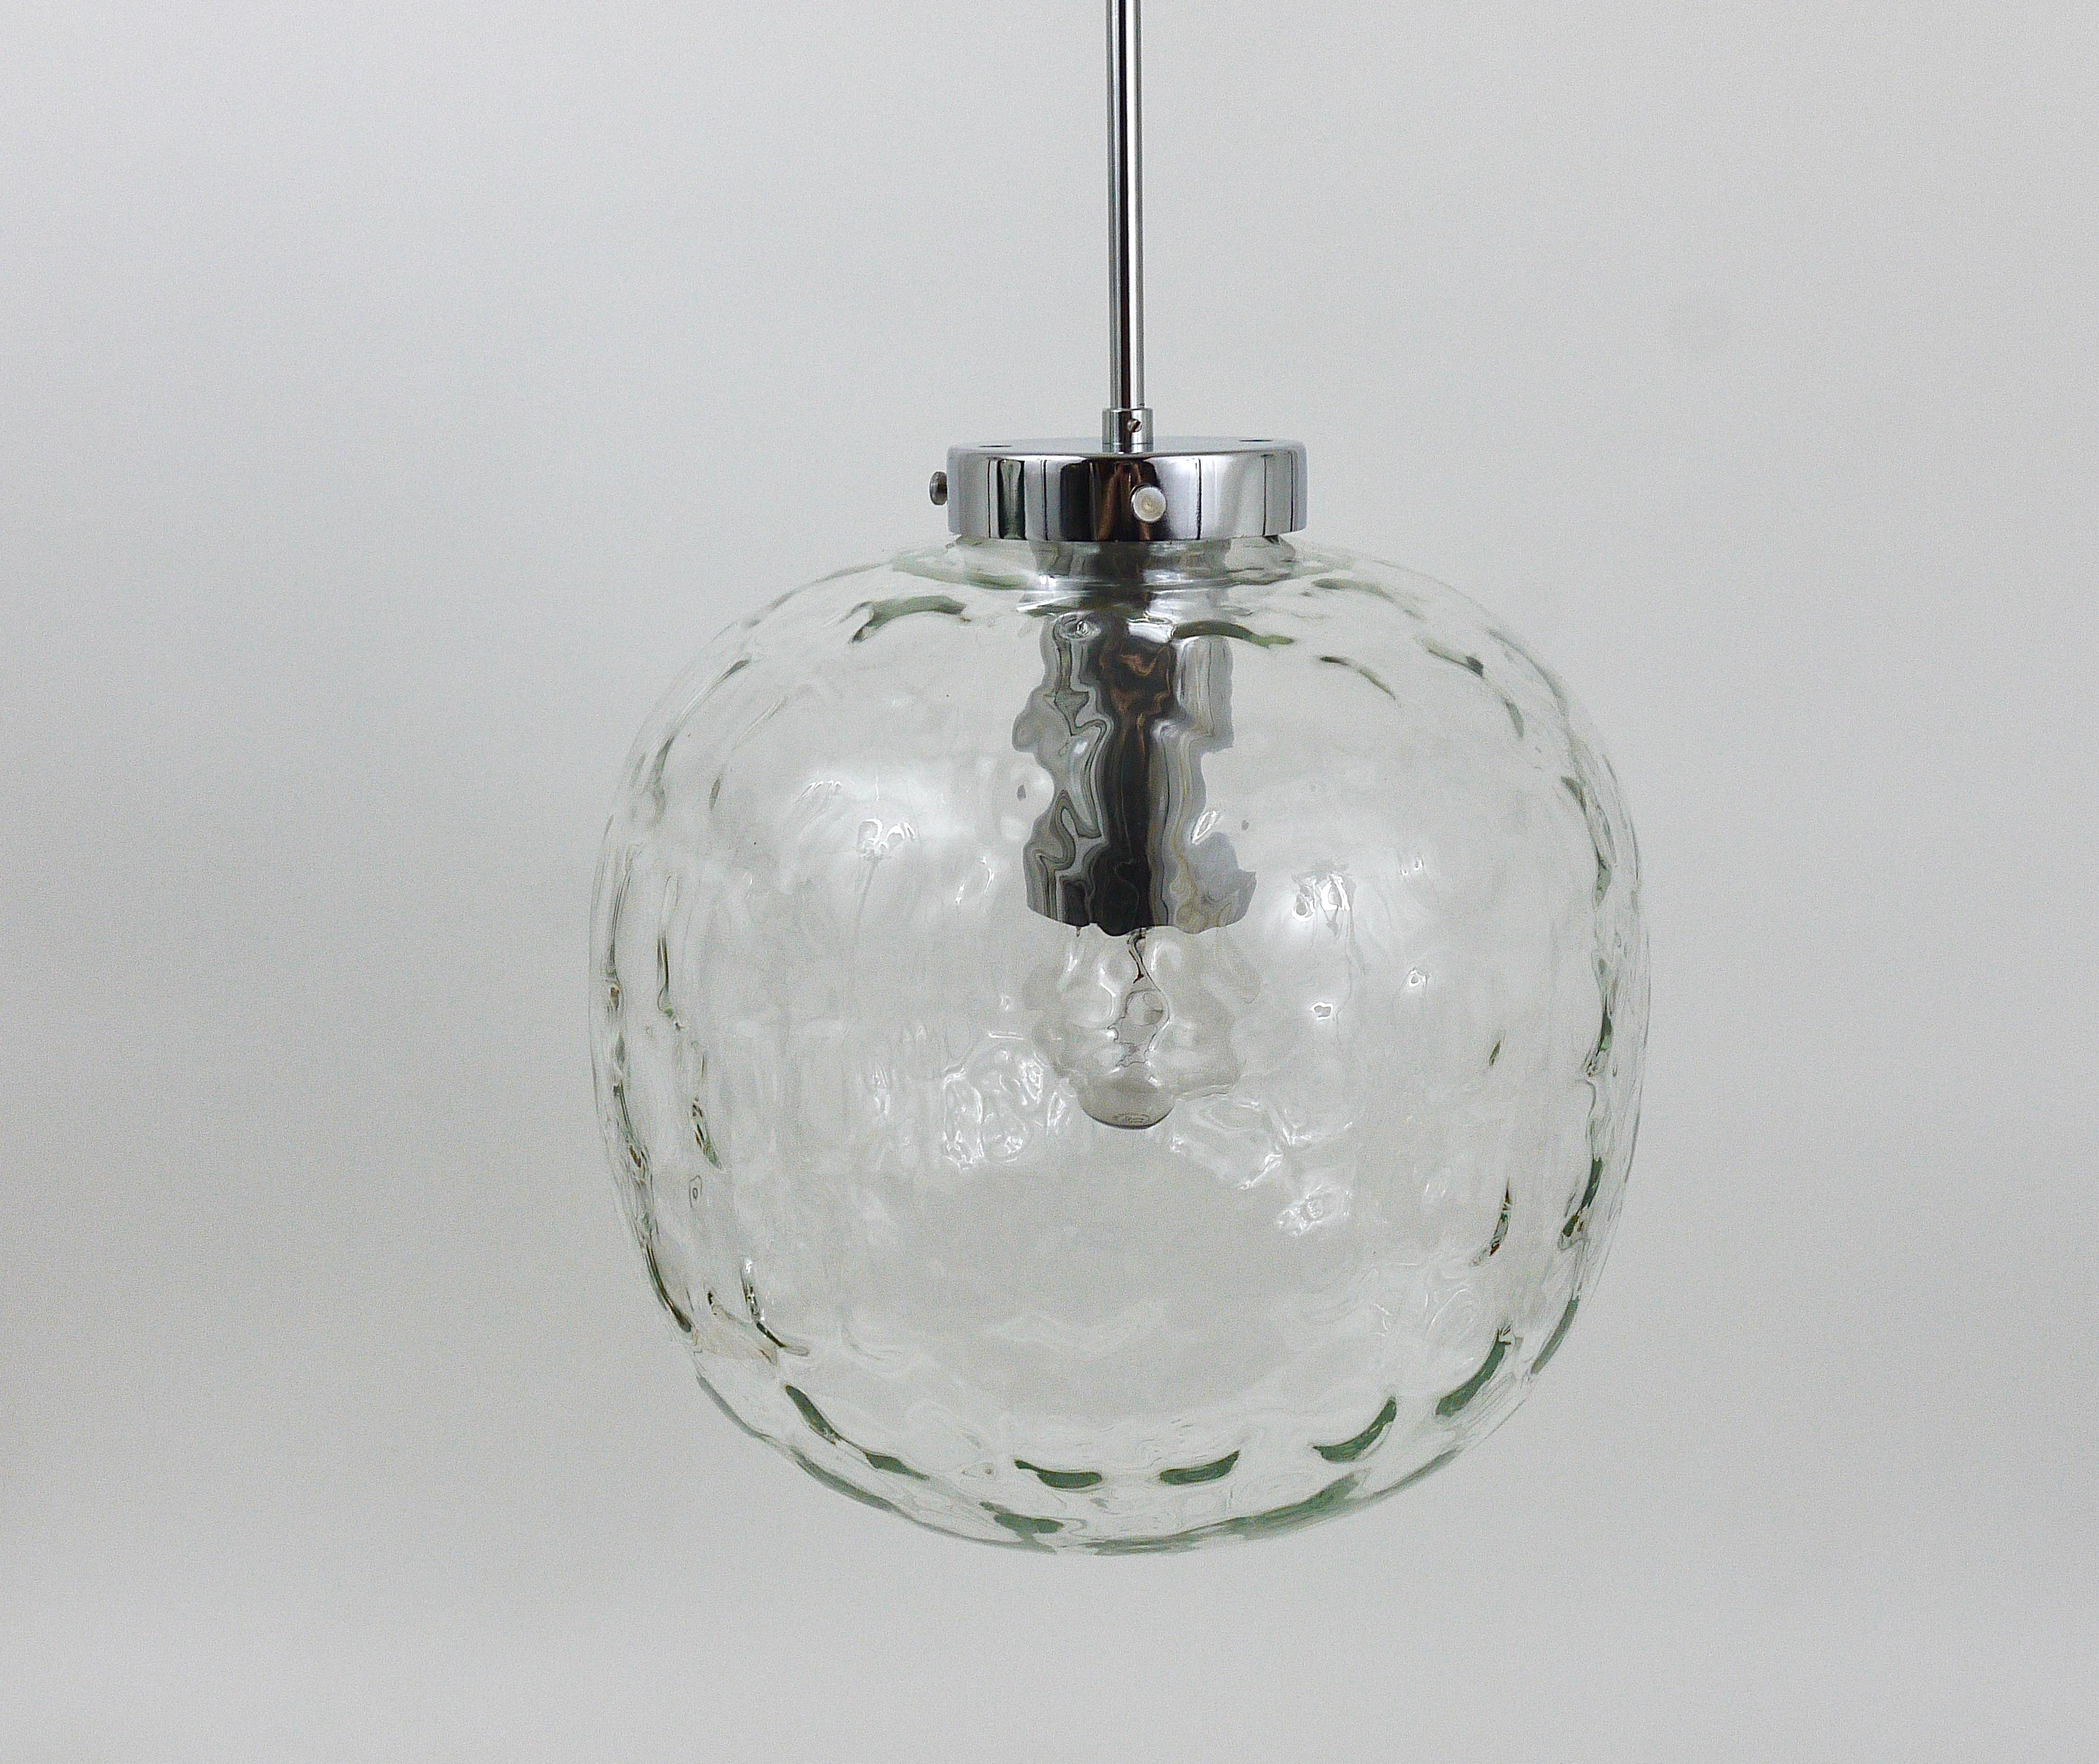 Large Bubble Melting Glass and Chrome Globe Pendant Lamp, Germany, 1970s For Sale 10